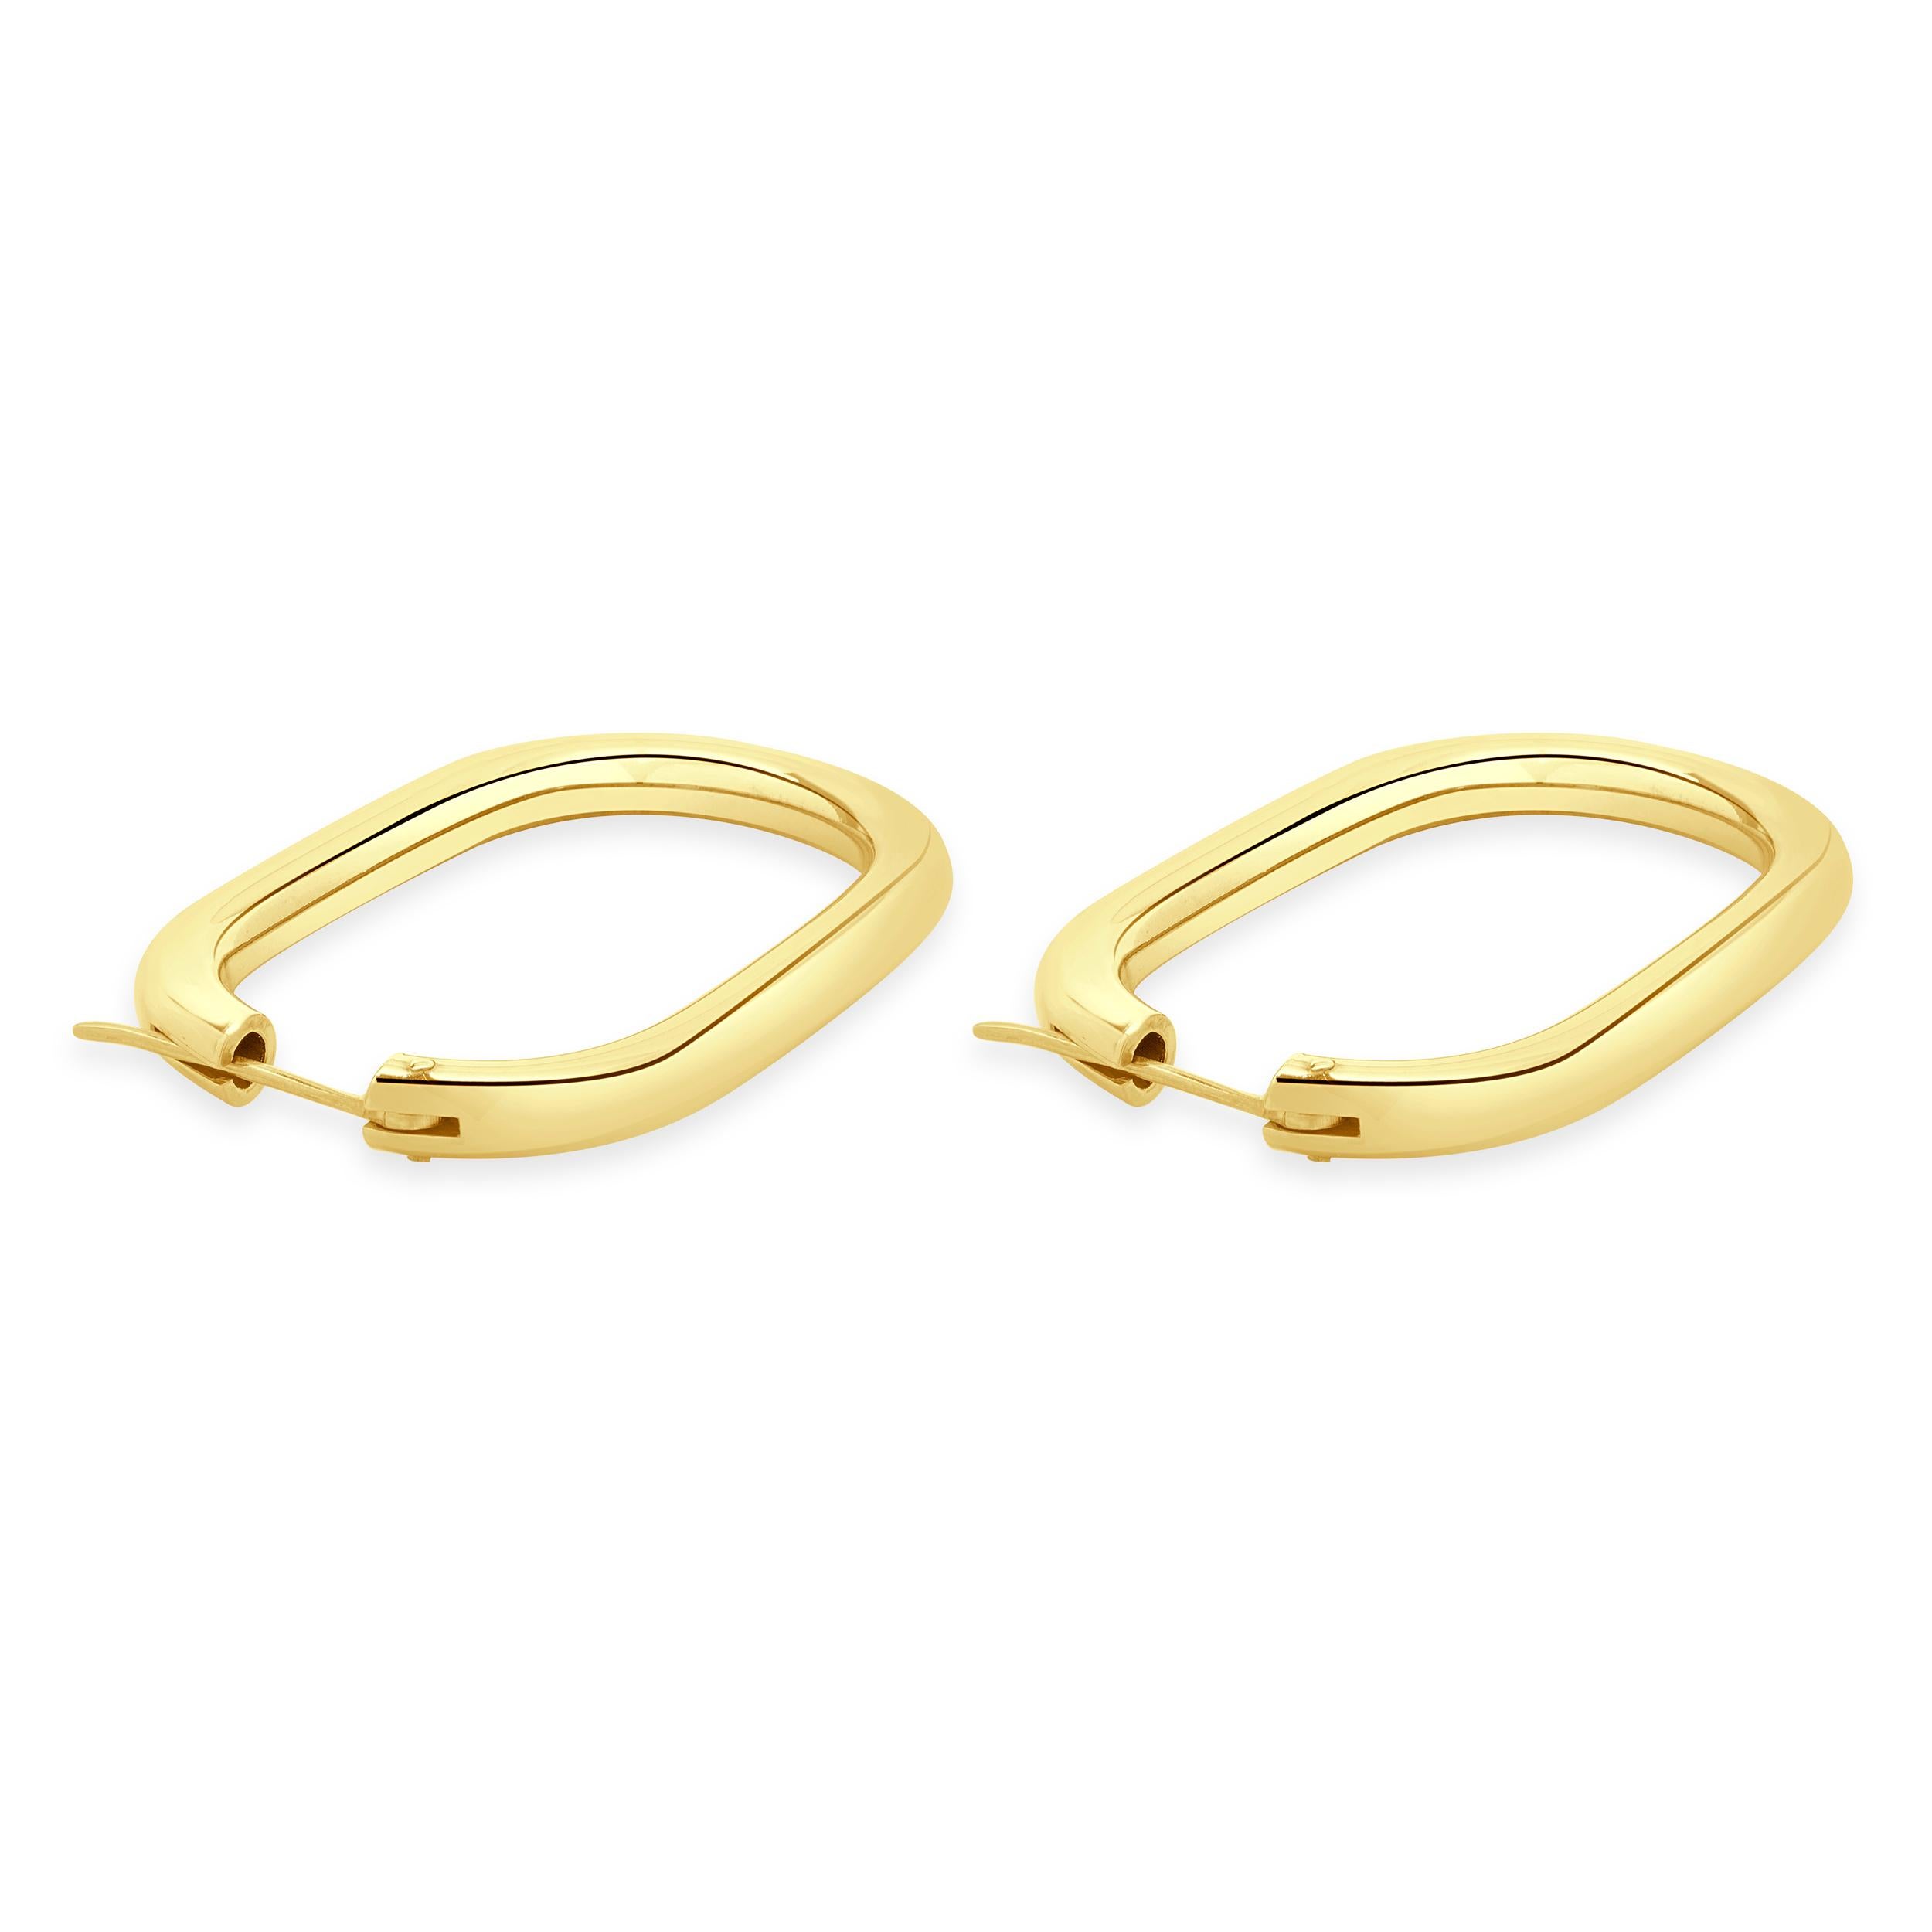 18 Karat Yellow Gold Oval Tube Hoop Earrings In Excellent Condition For Sale In Scottsdale, AZ